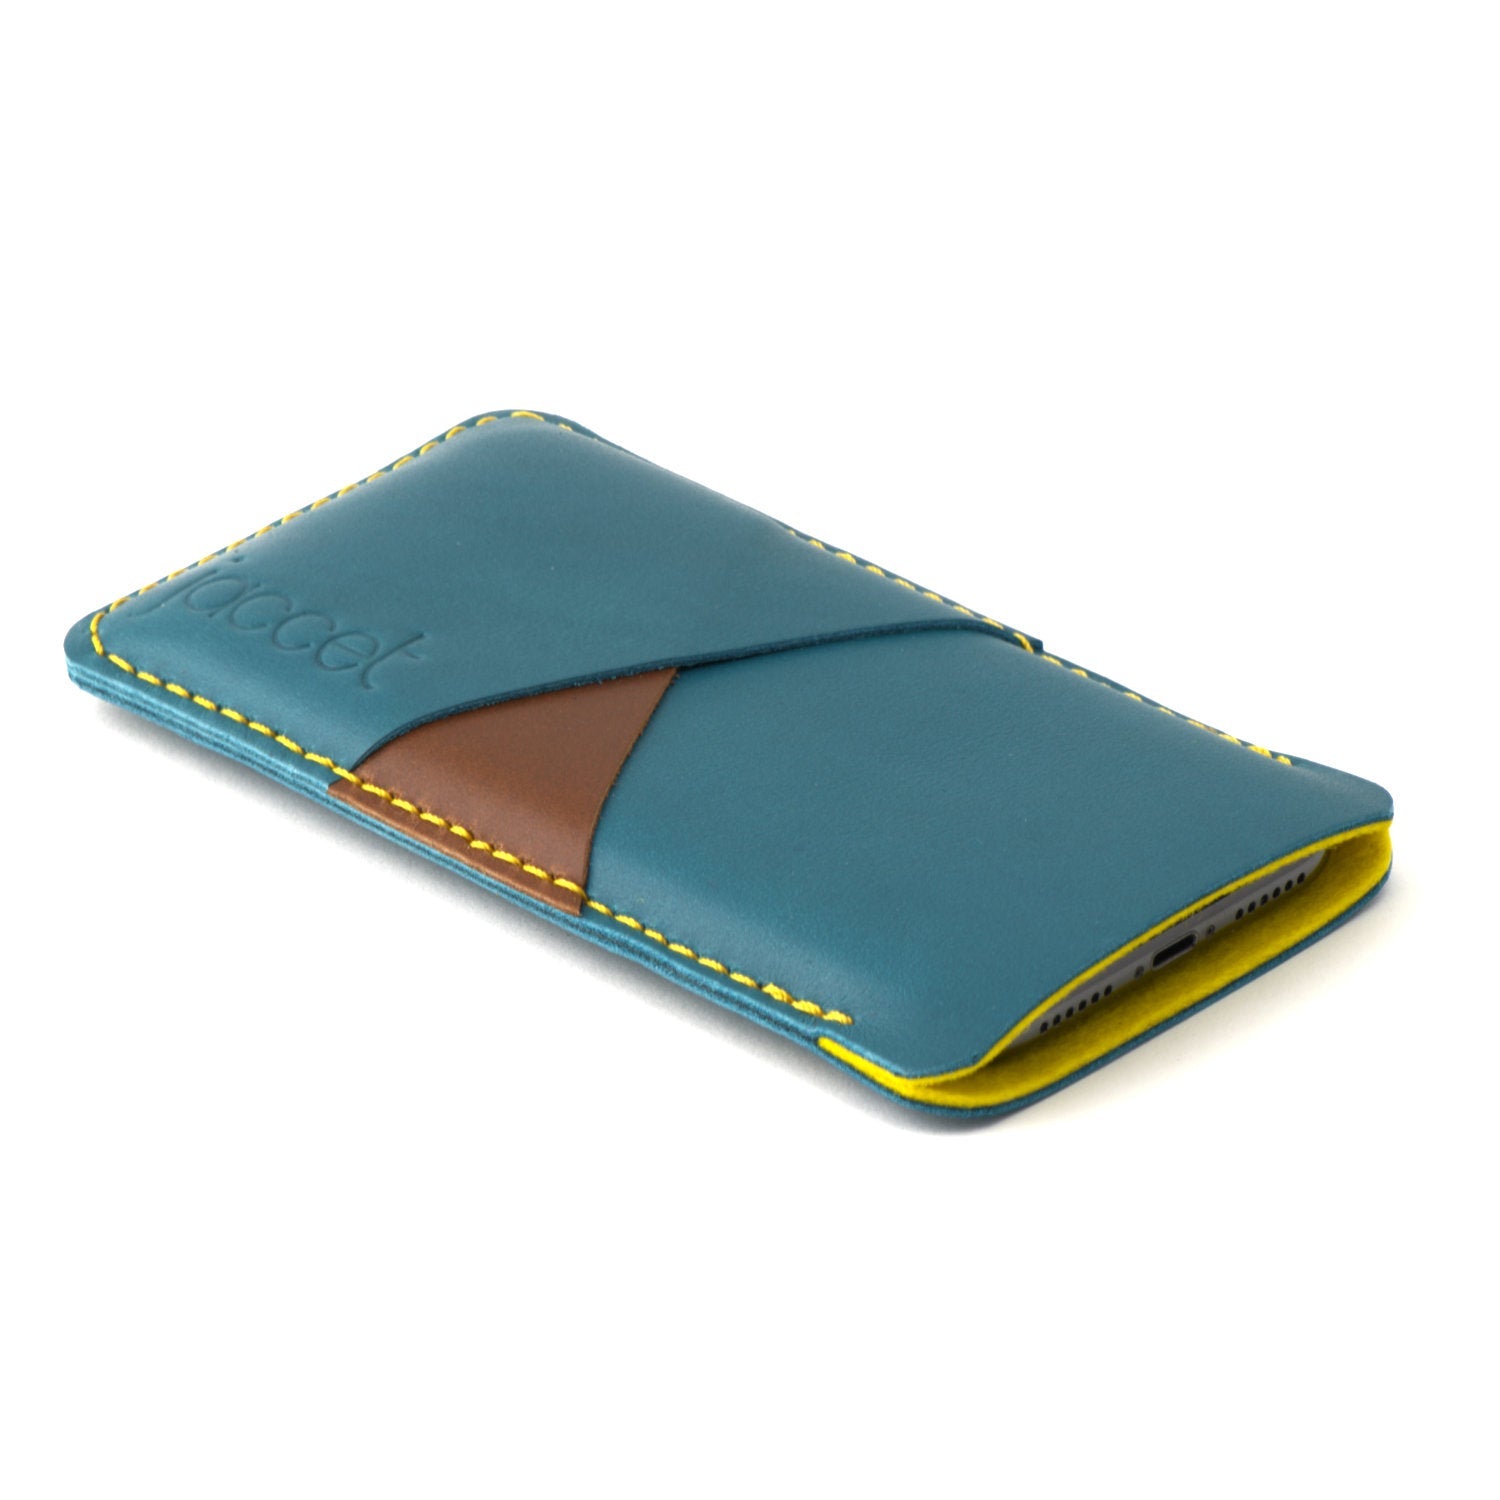 Full-grain leather OnePlus sleeve - Turquoise leather with two pockets for cards